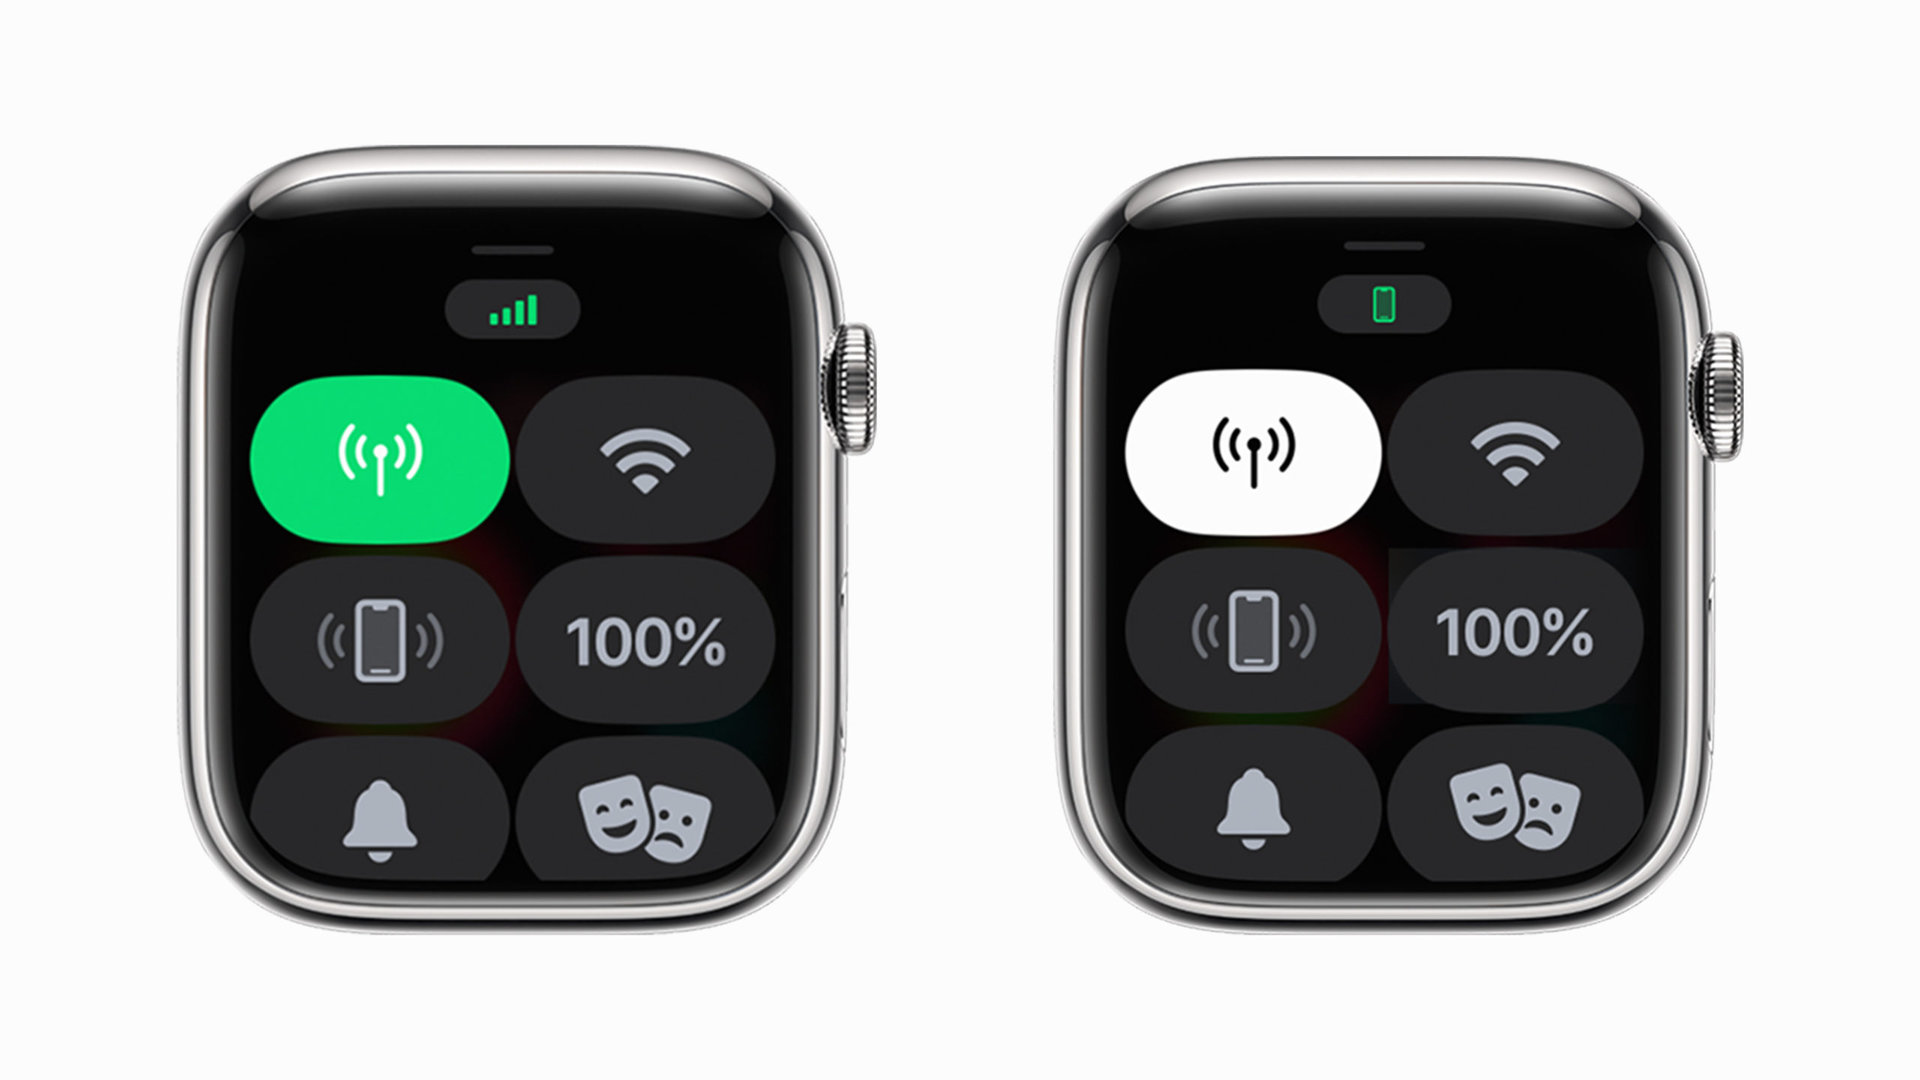 Two Apple Watch illustrations display the possible Cellular Signal icons users with data will find in their control panel.